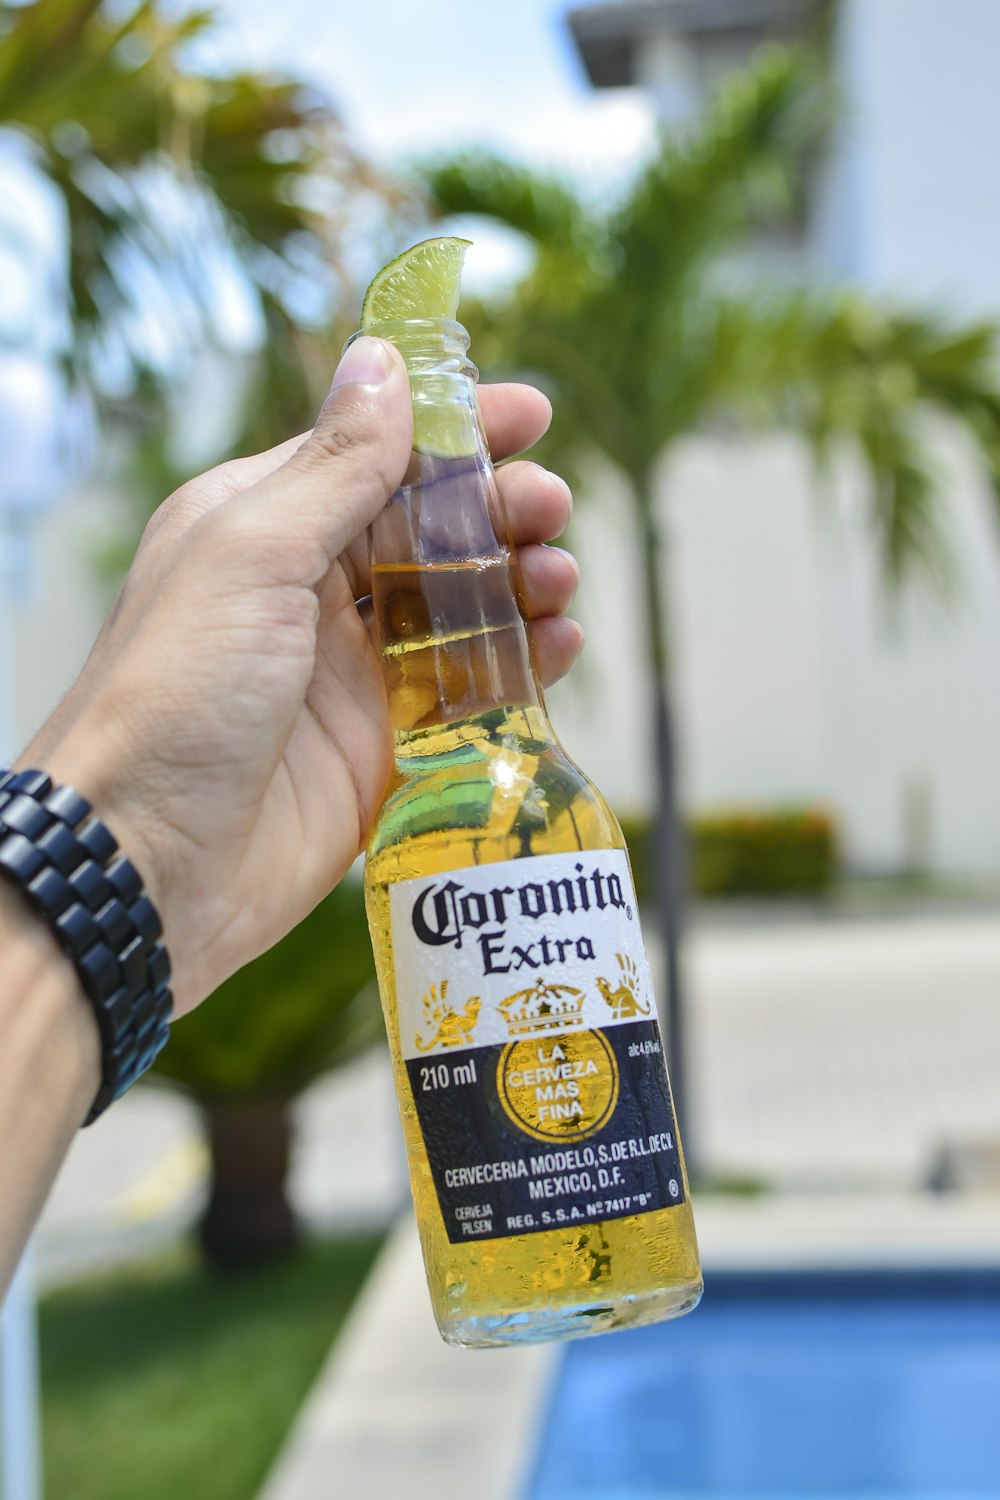 Corona Pictures Download Free Images On Unsplash Images, Photos, Reviews